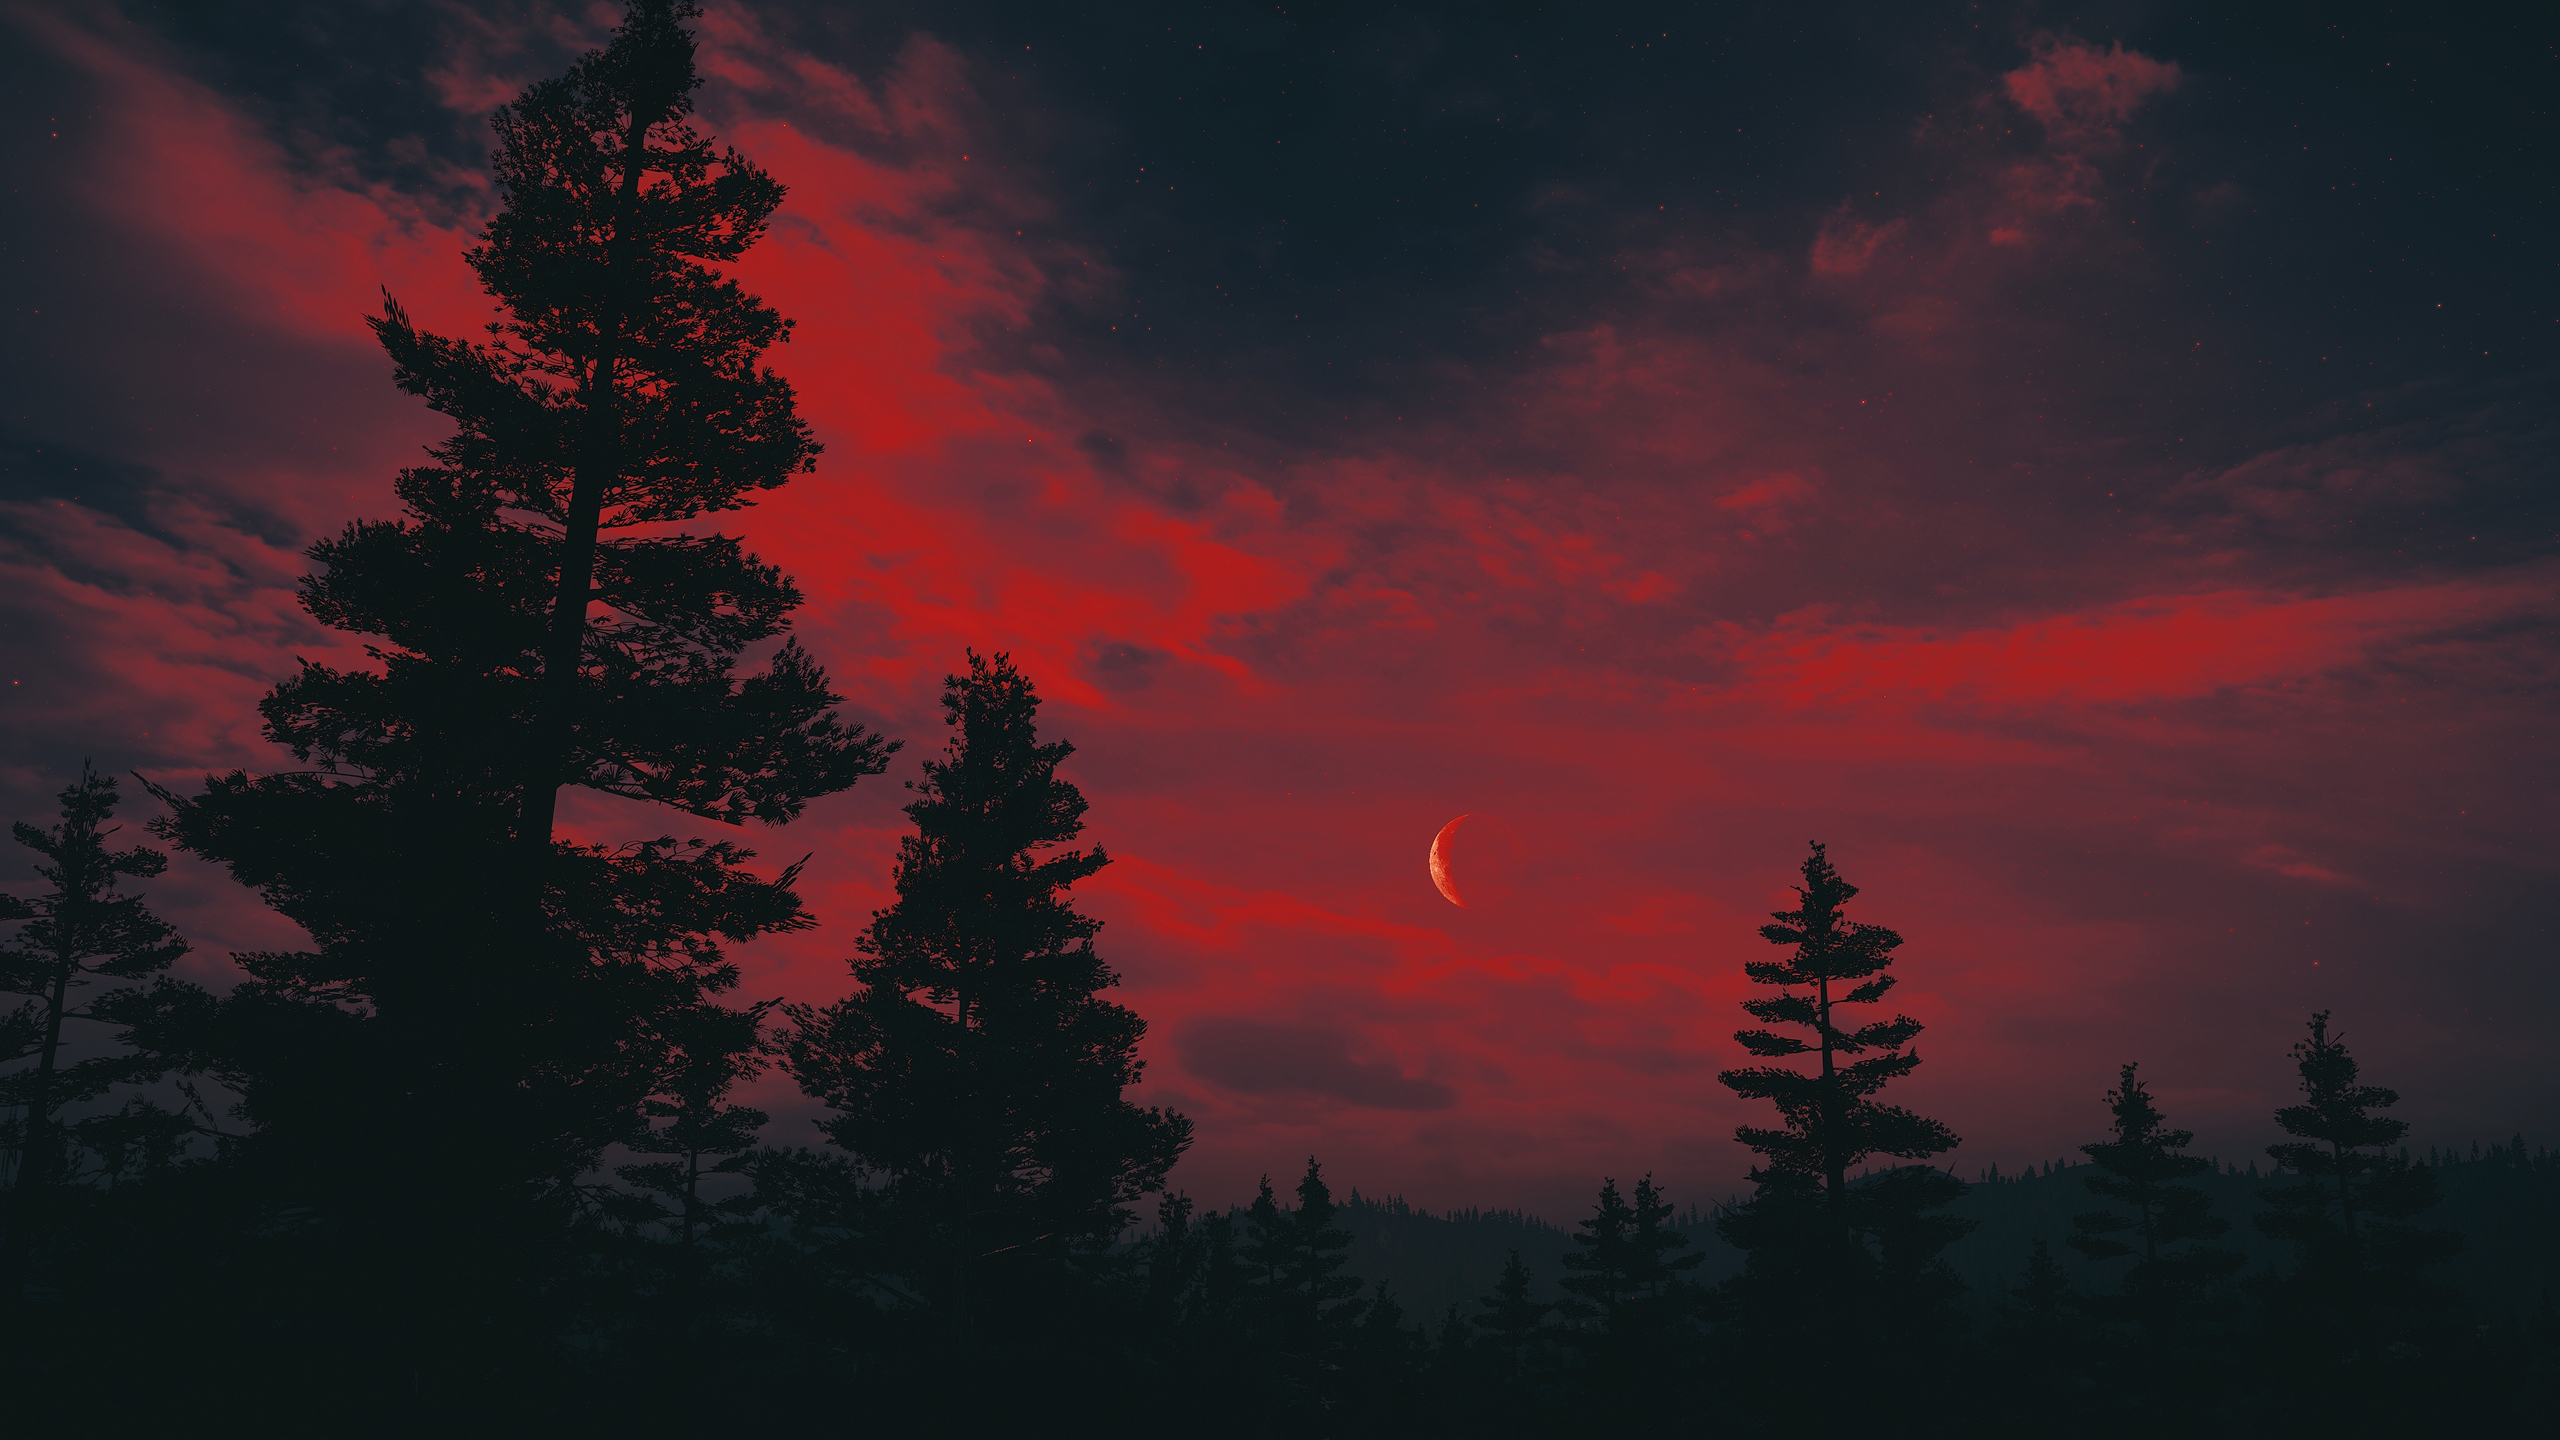 Wallpaper, Far Cry red sky, forest, PC gaming, landscape, night 2560x1440